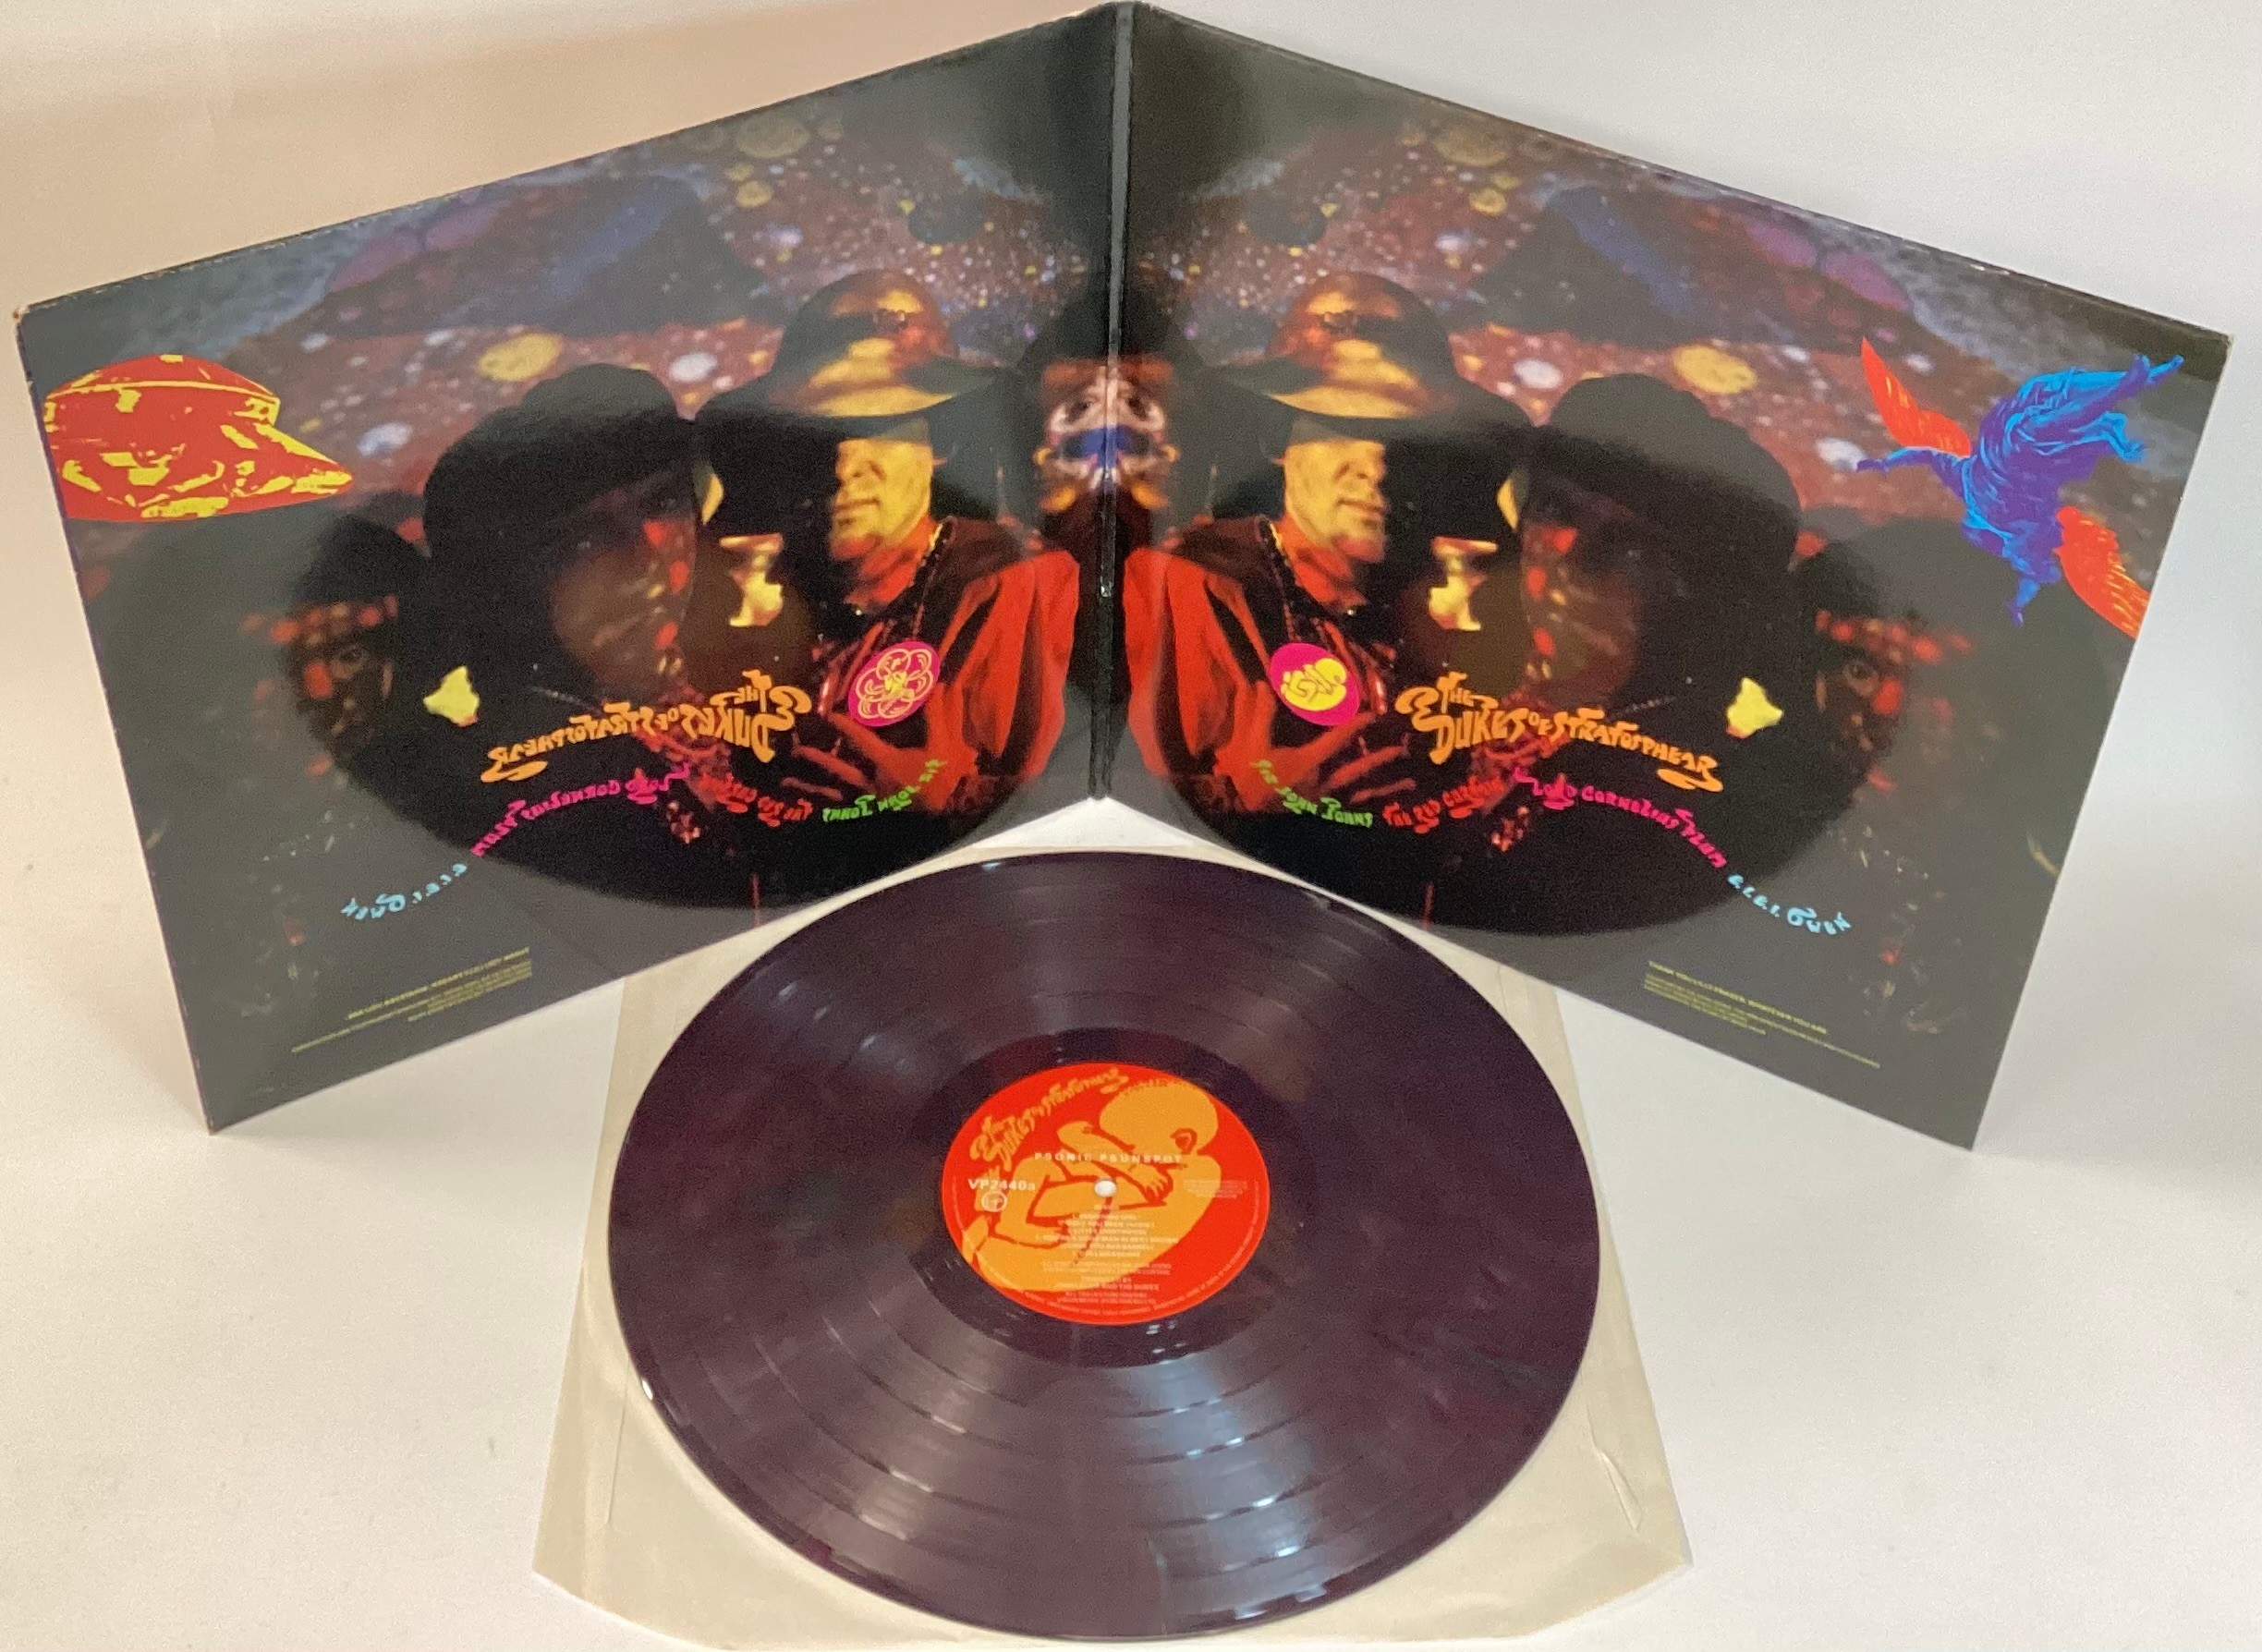 XTC THE DUKES OF STRATOSPHEAR ‘PSONIC PSUNSPOT’ COLOURED UK VINYL. Found here on Virgin Records - Image 3 of 3